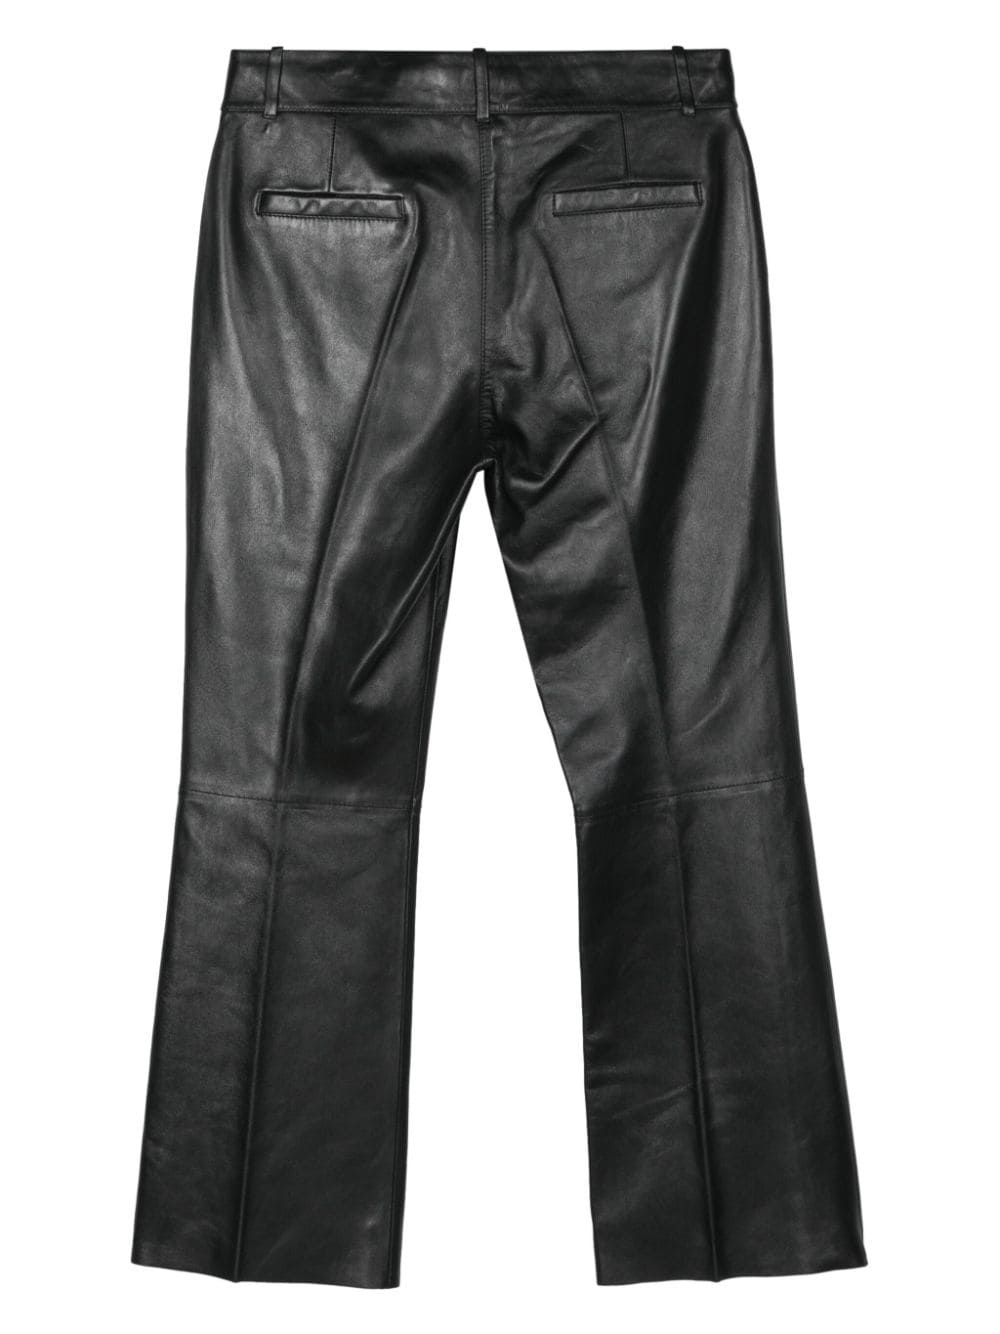 Zia tailored leather pants - 2